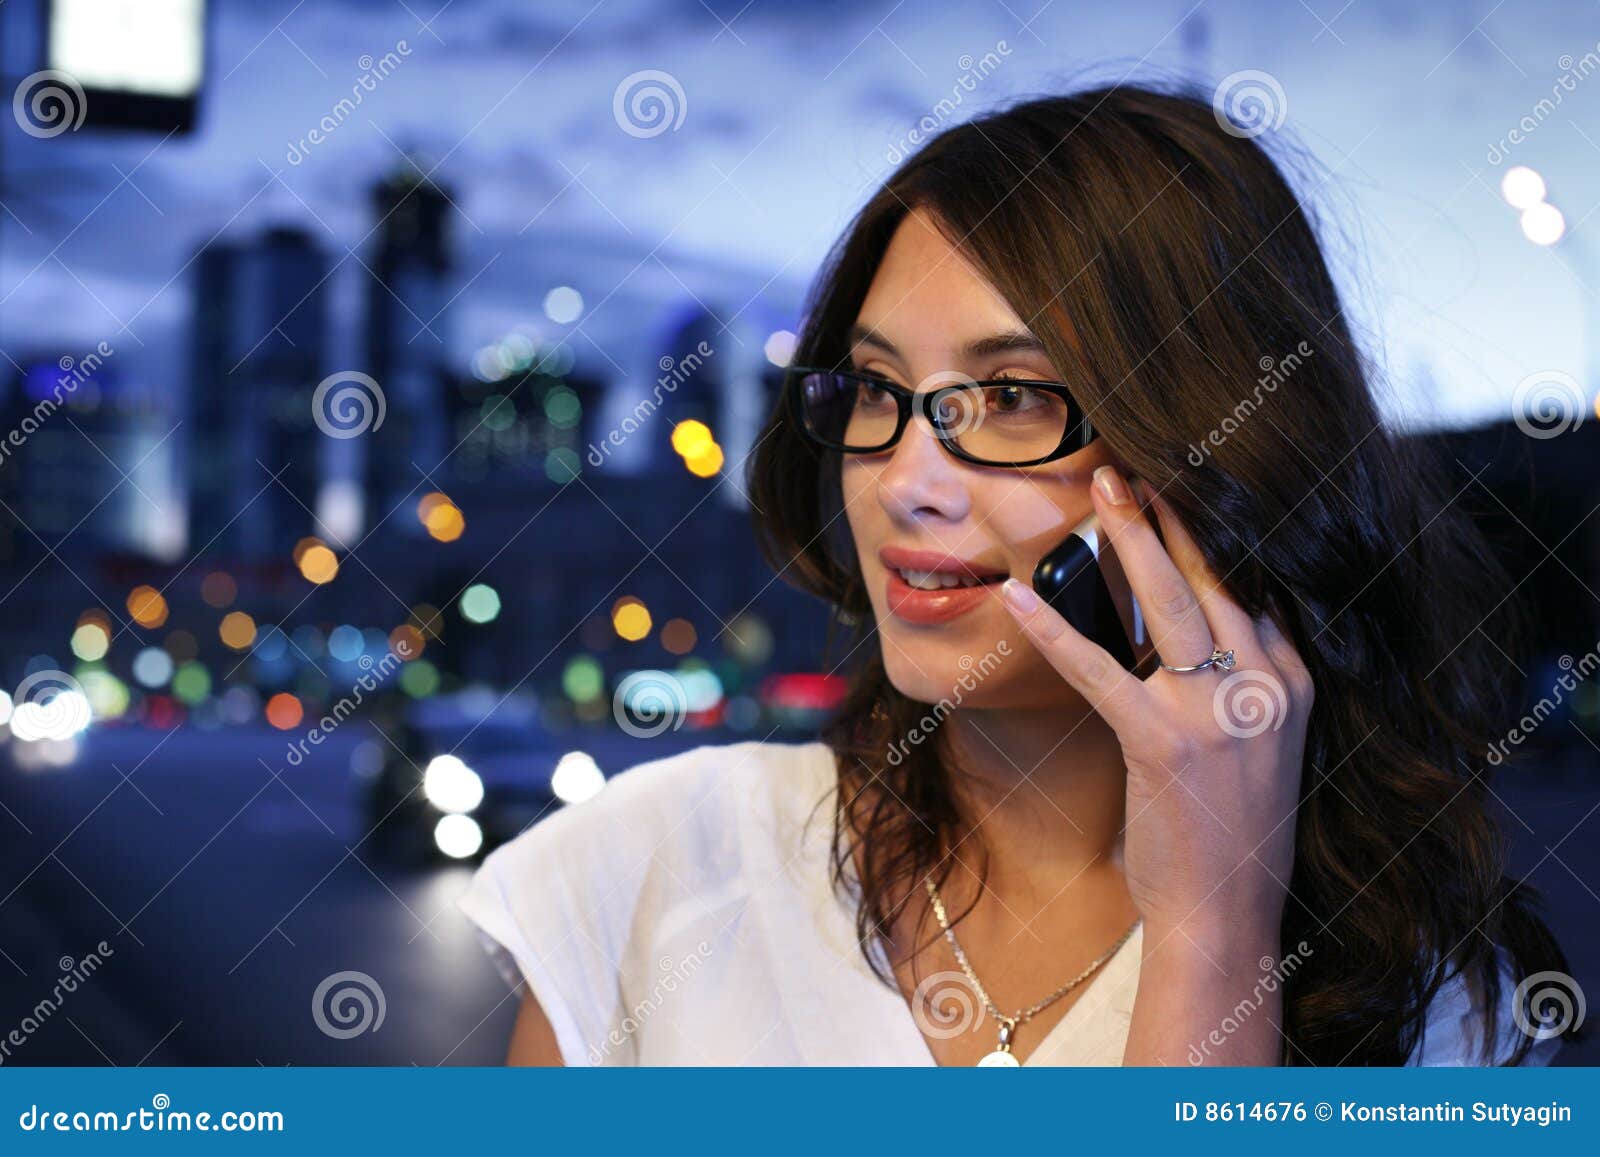 Phone talk stock photo. Image of cell, bokeh, businesswoman - 8614676